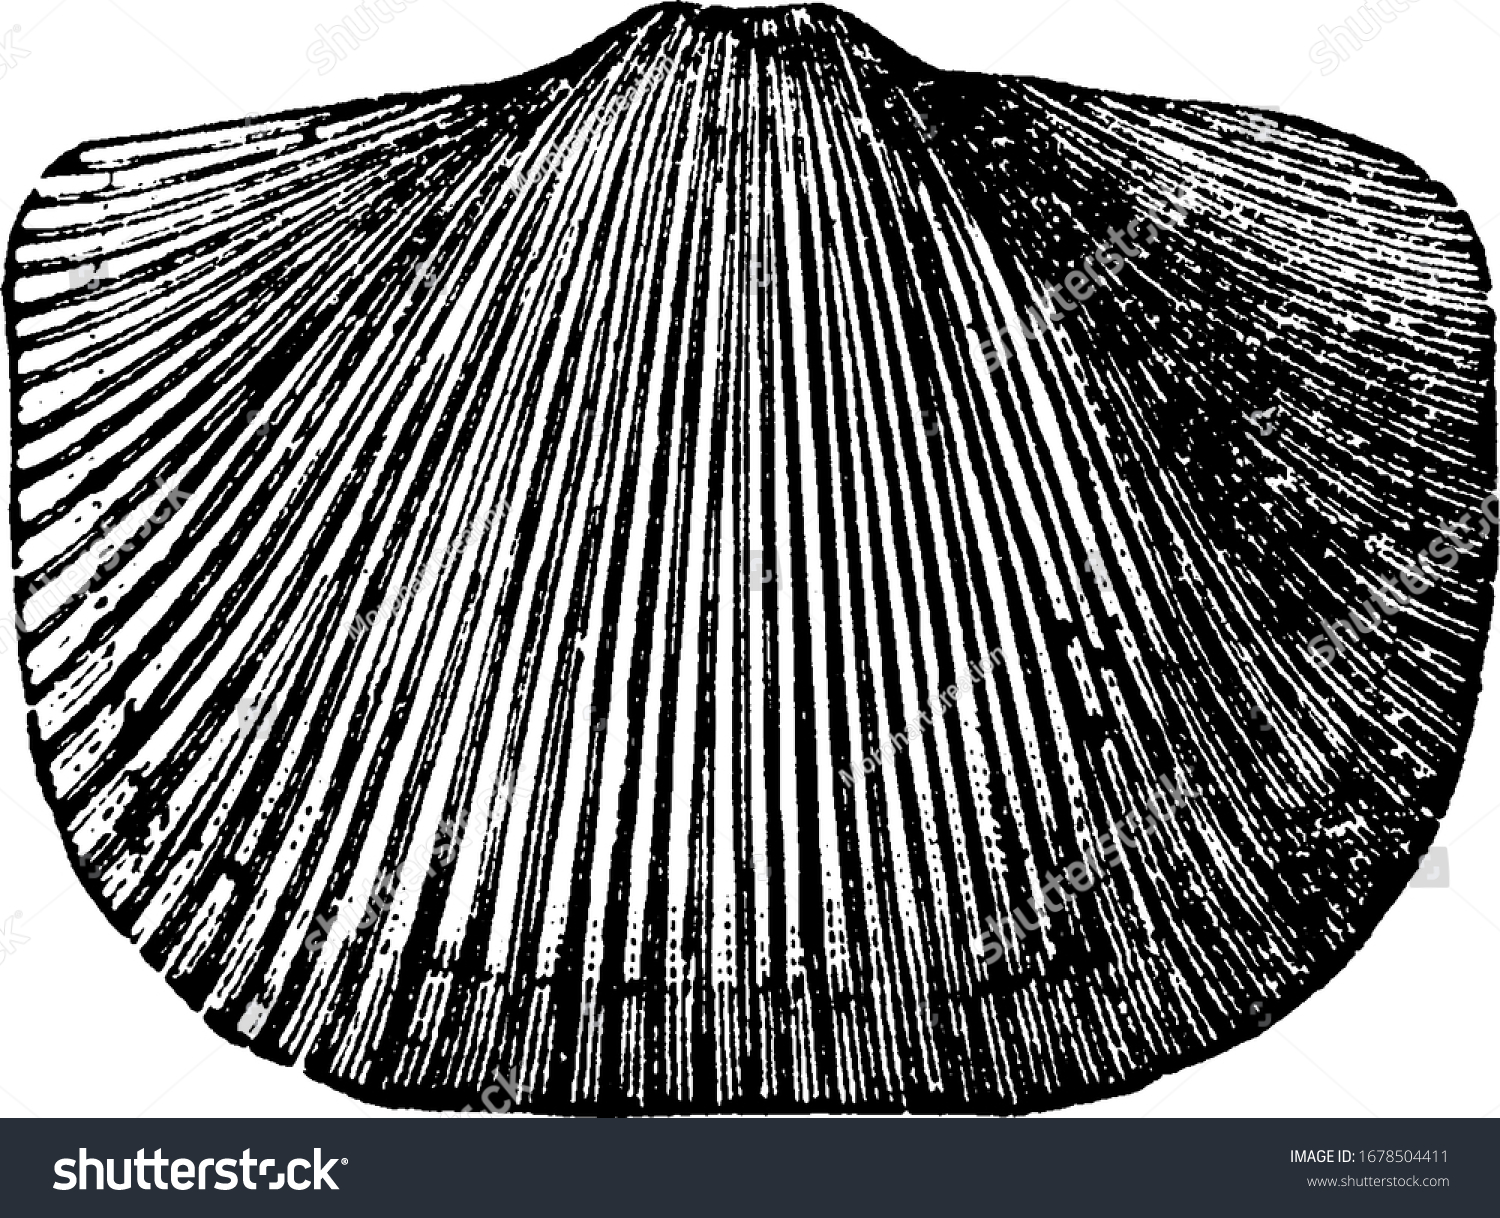 Image Orthis Mollusk Type Shell Formed Stock Vector (Royalty Free ...